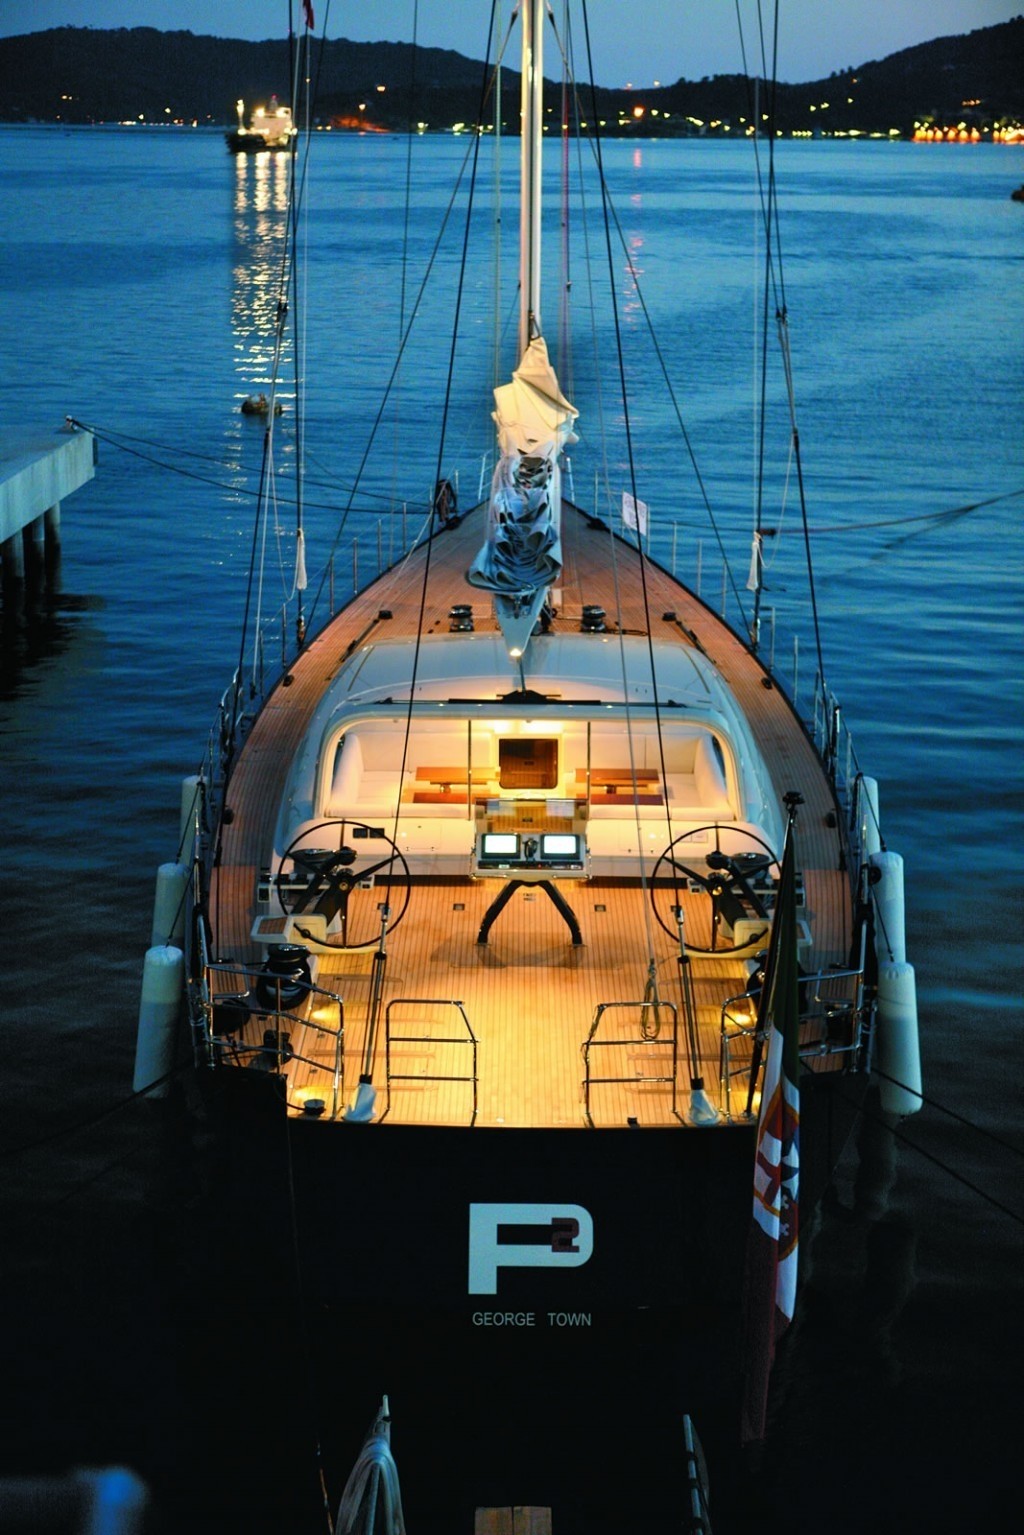 Evening: Yacht P2's Deck Pictured